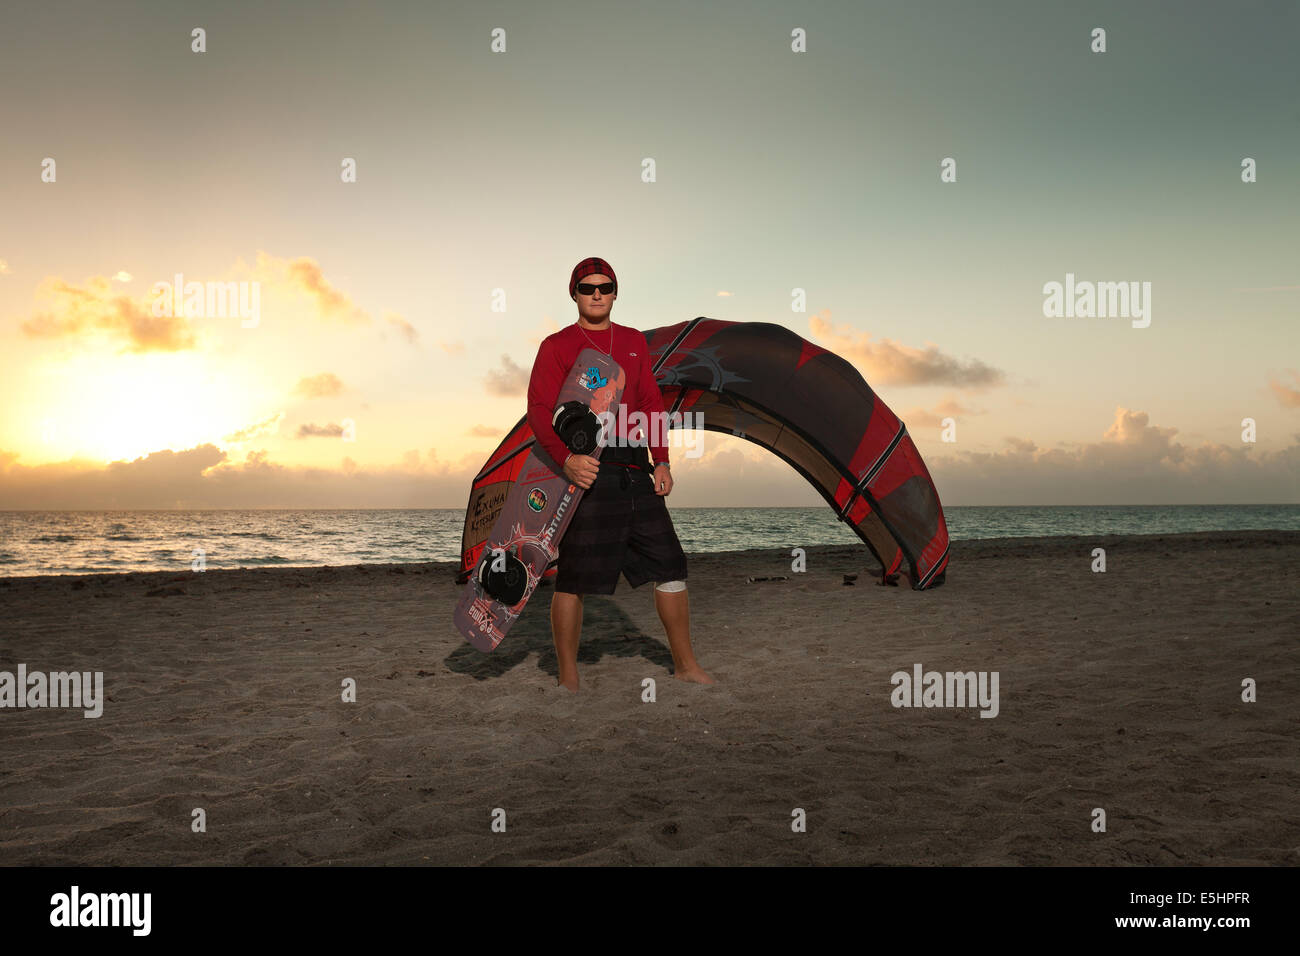 Kiteboarder holding planche Banque D'Images